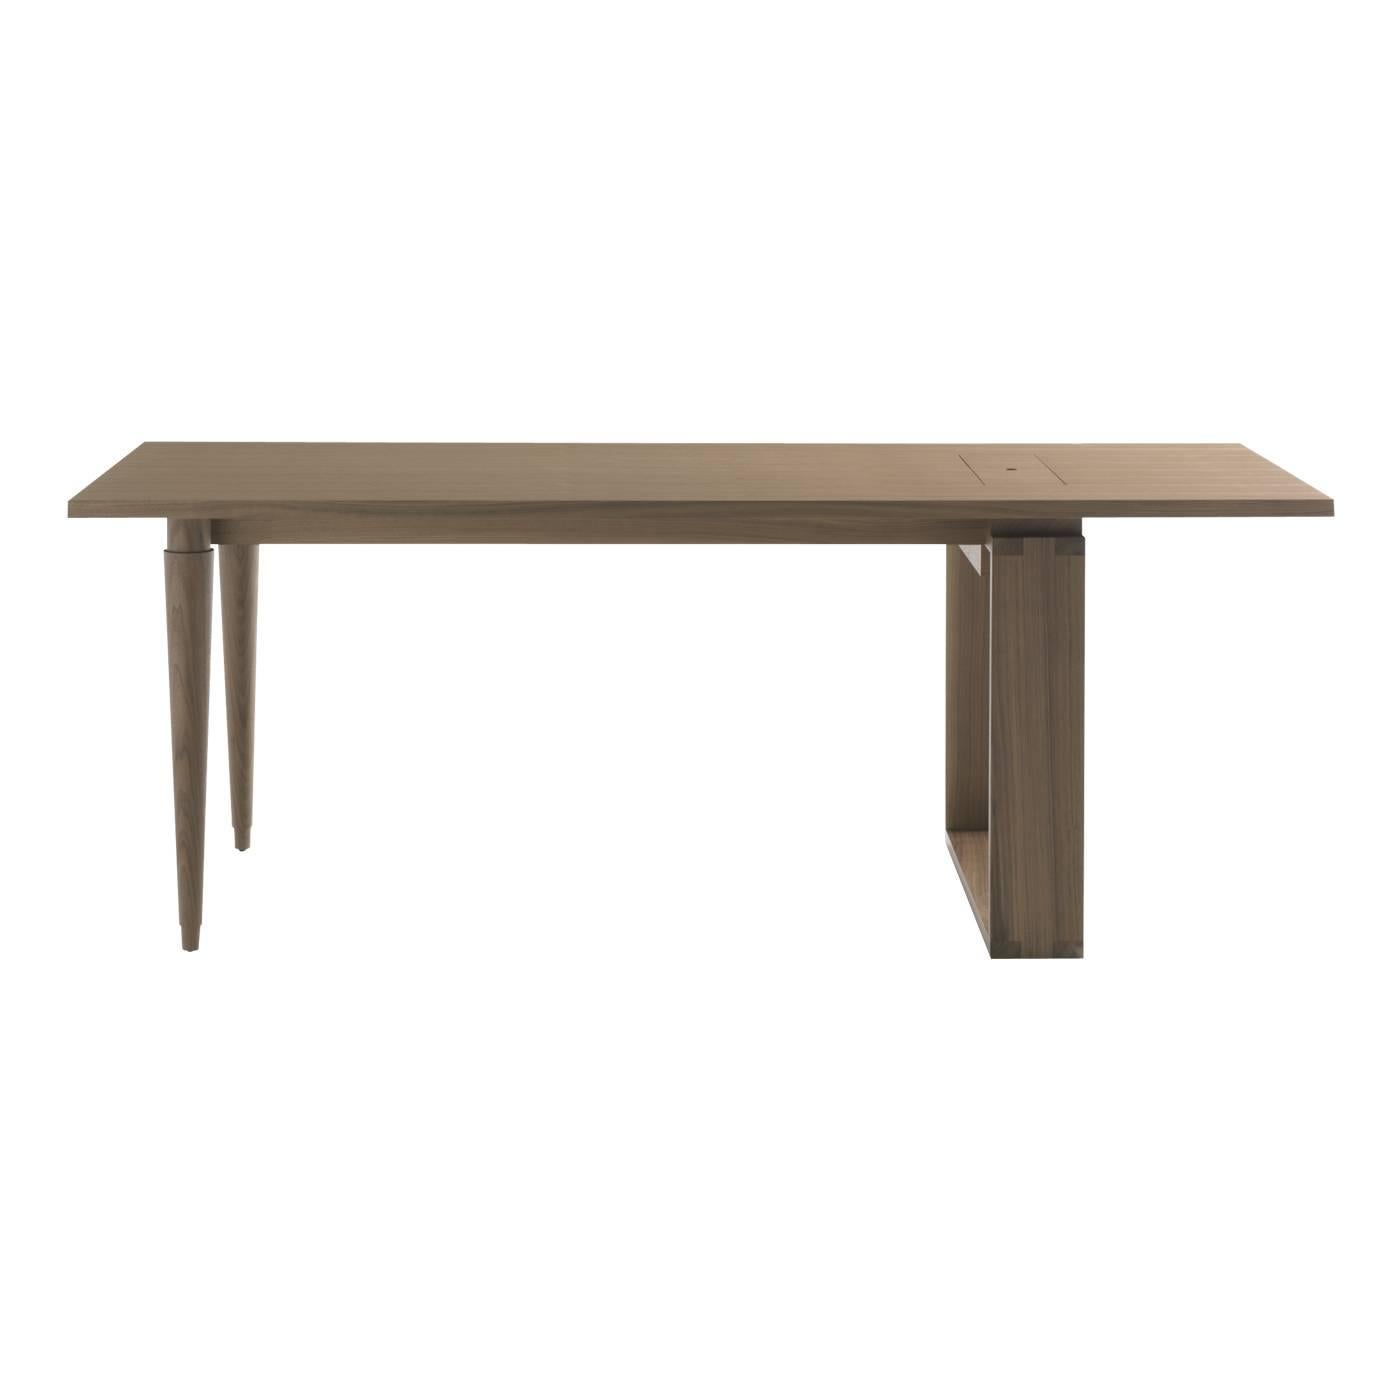 Tata Wood Table For Sale